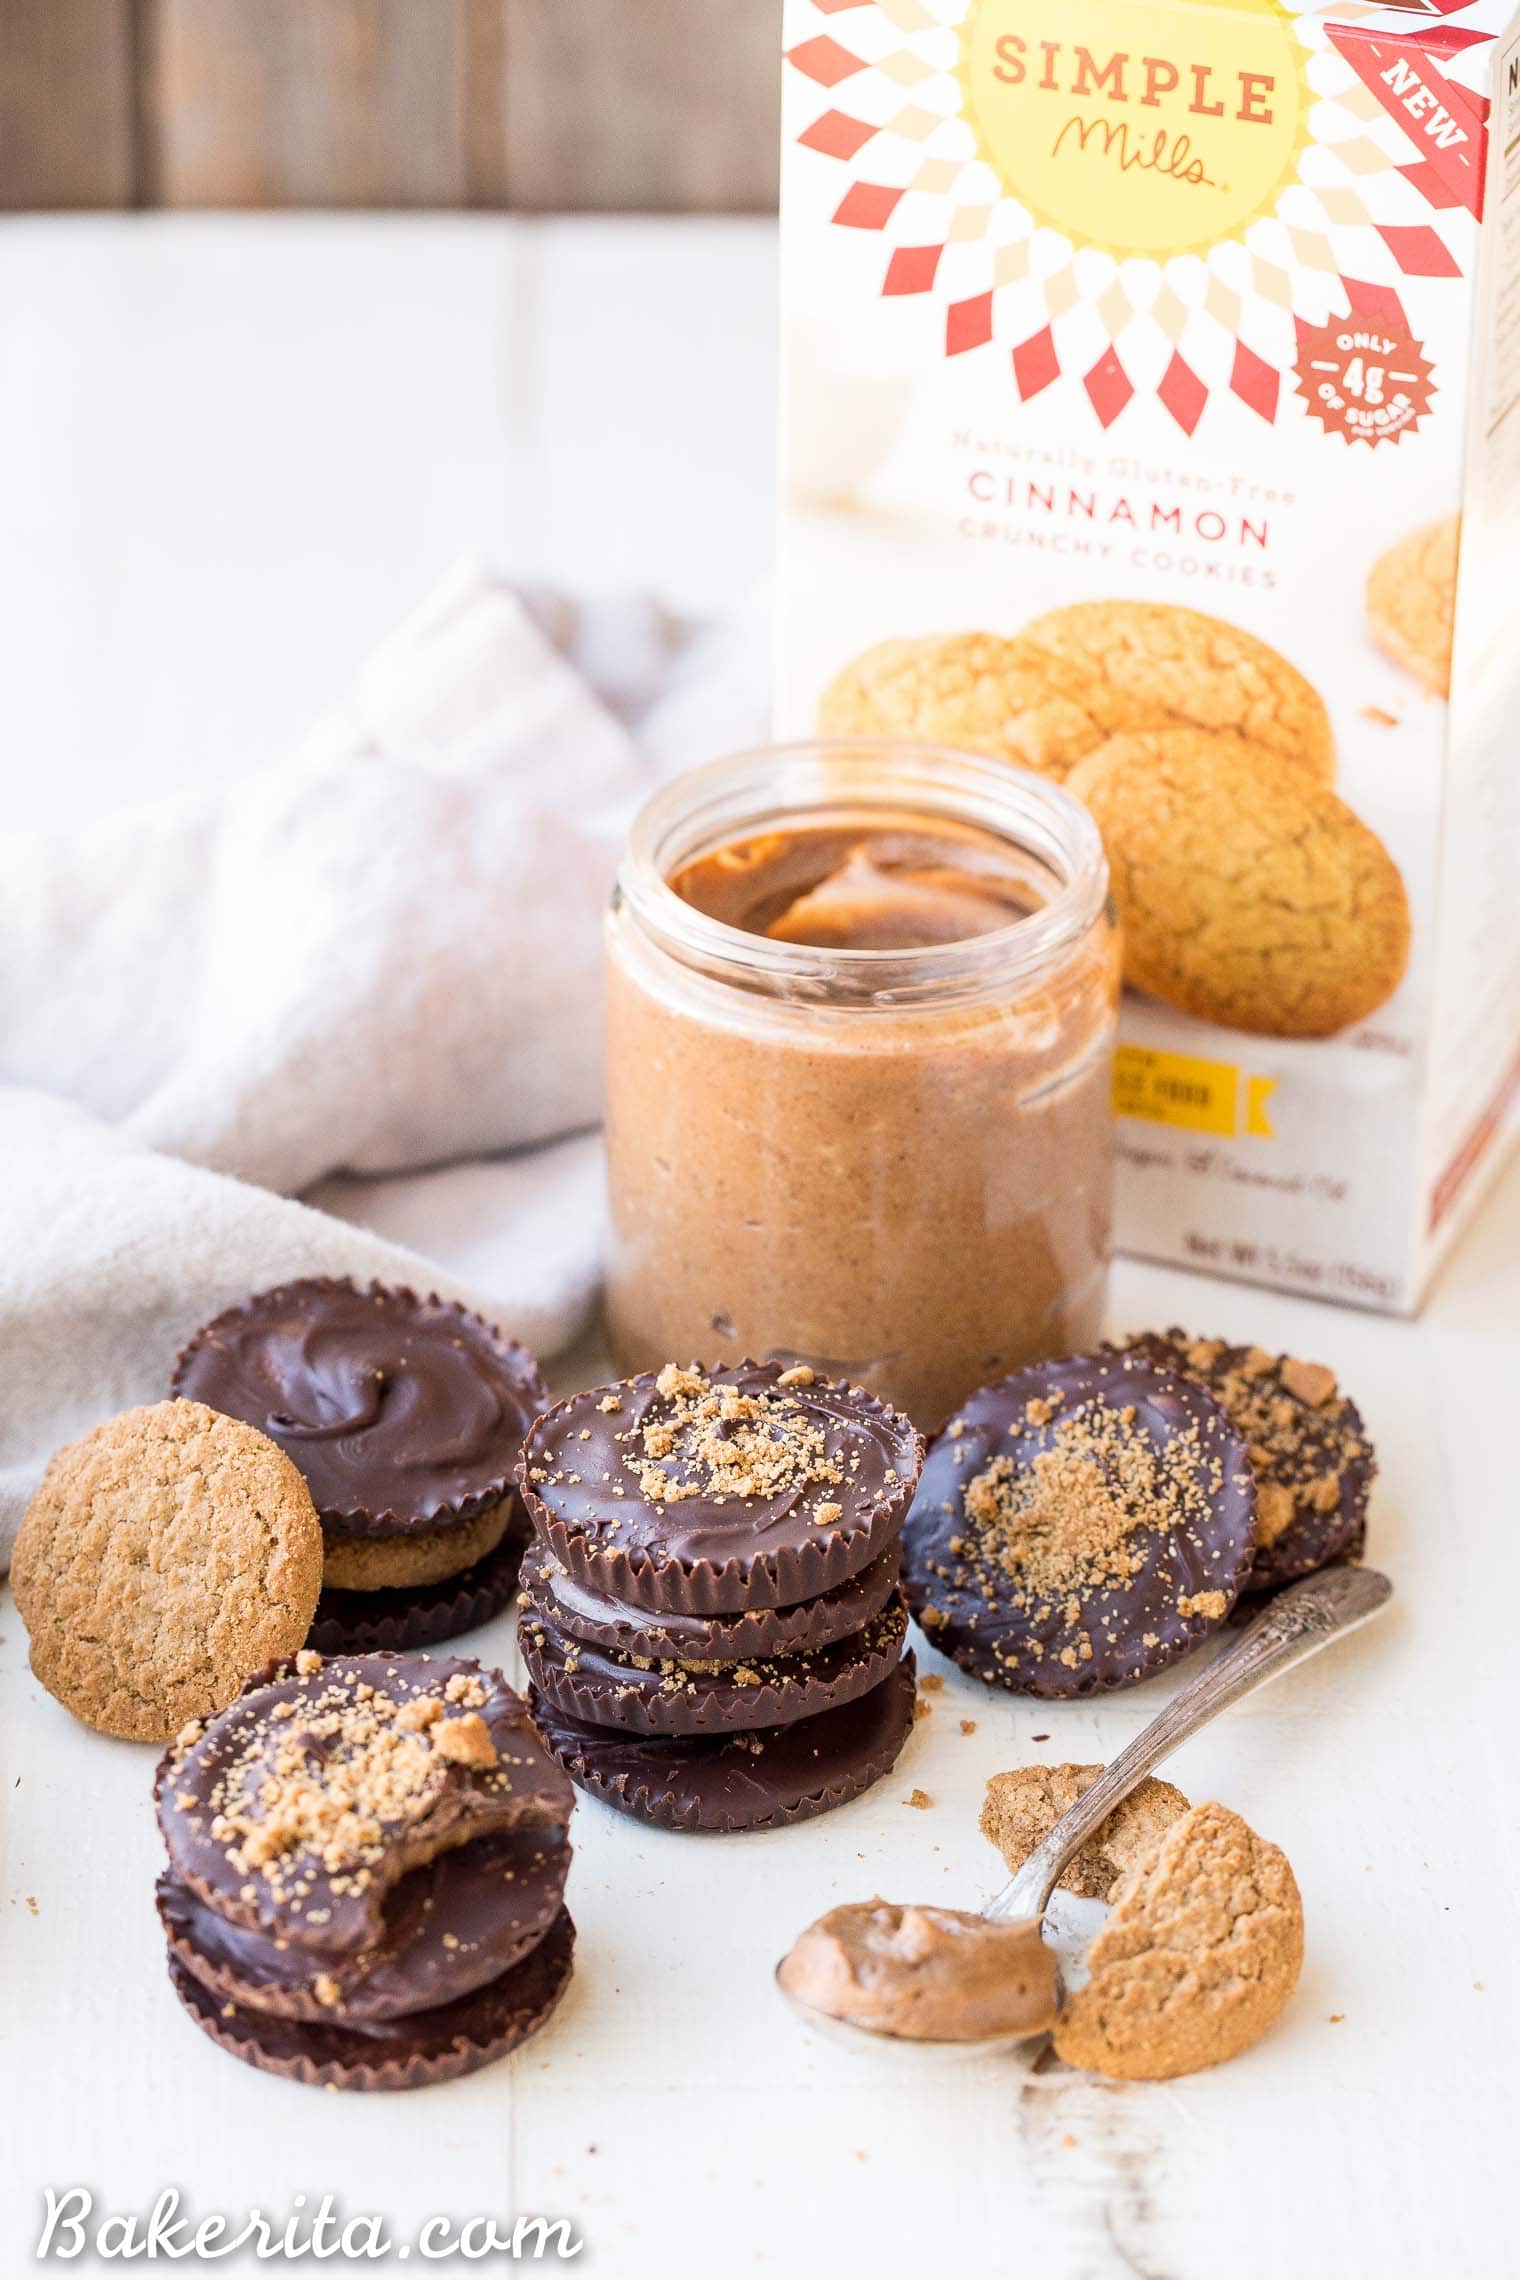 These Chocolate Cookie Butter Cups are filled with a lusciously smooth and creamy homemade cookie butter! I bet you'd never guess that these incredible homemade chocolate candies are gluten-free, paleo, and vegan.